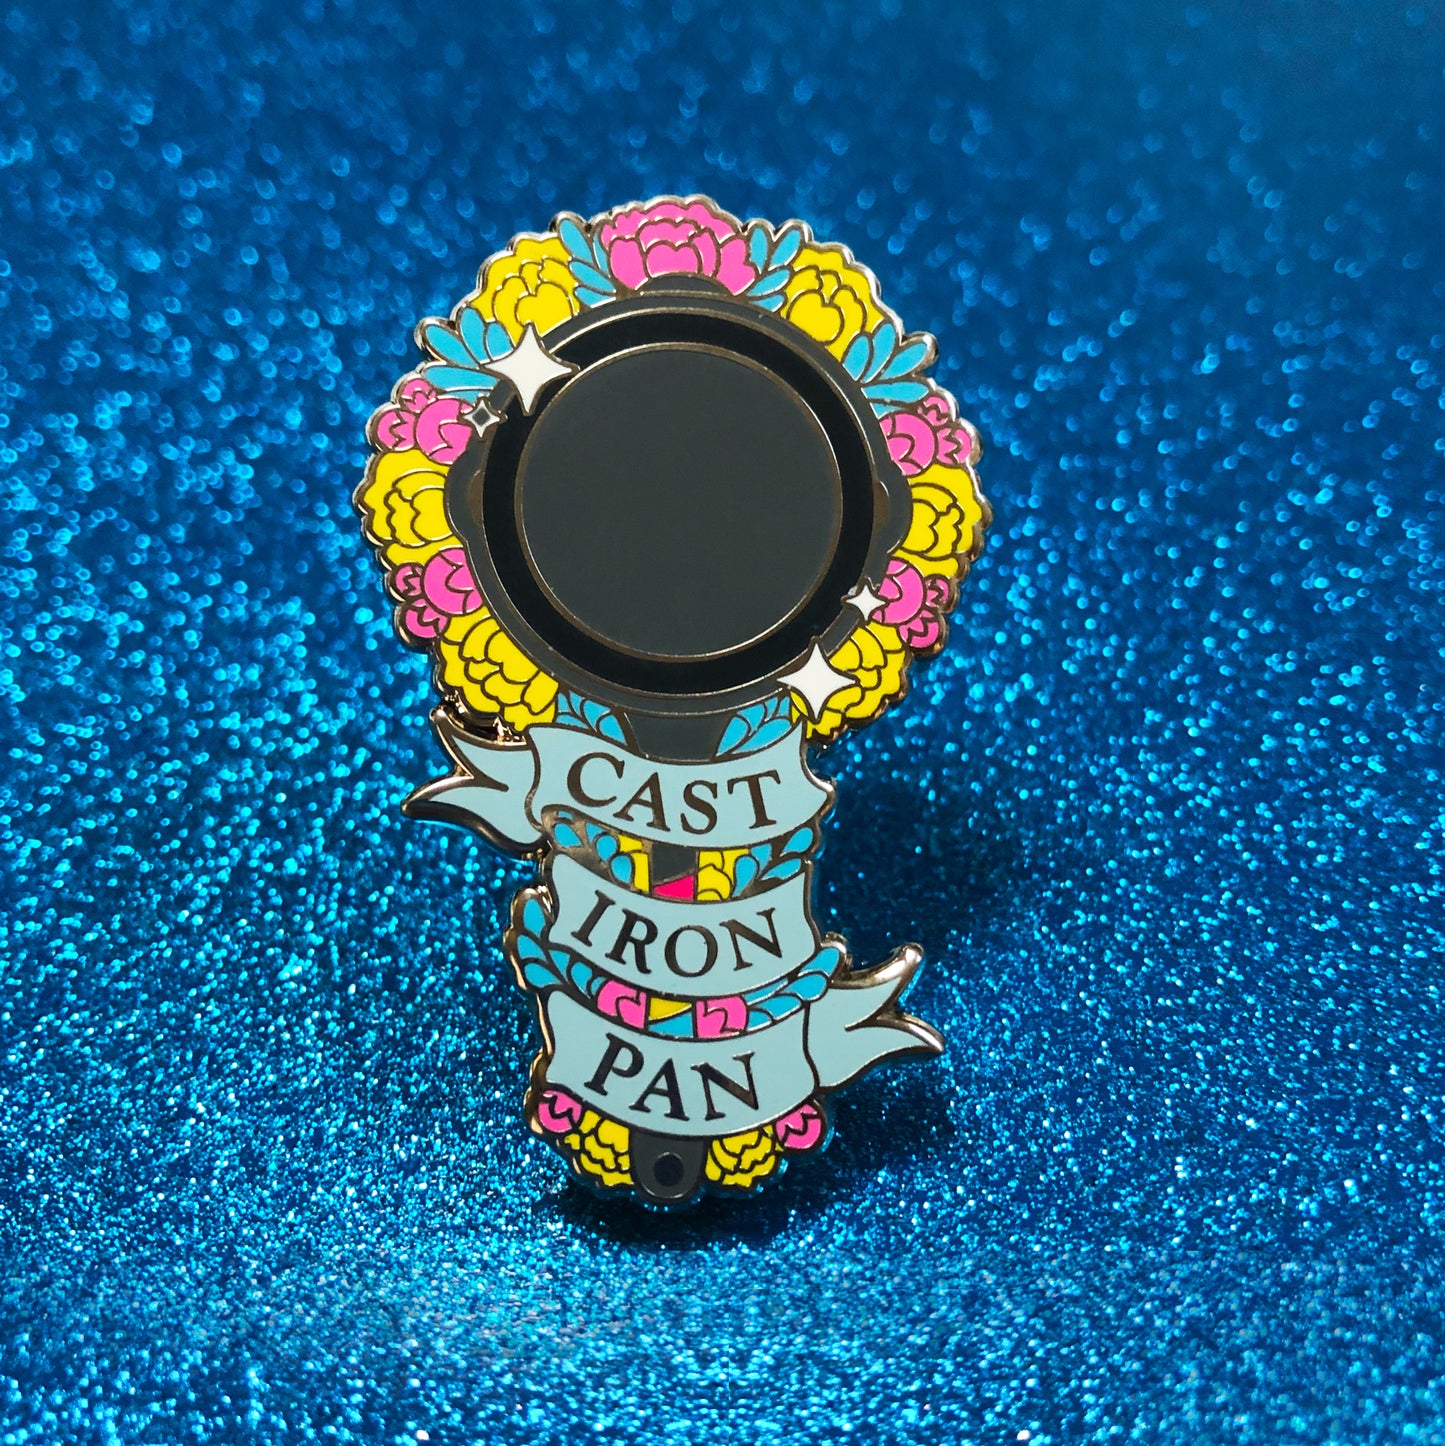 The goldcast pin features a cast iron cooking pan and flowers in the colors of the pansexual flag. A ribbon trails across the front and reads "Cast Iron Pan"